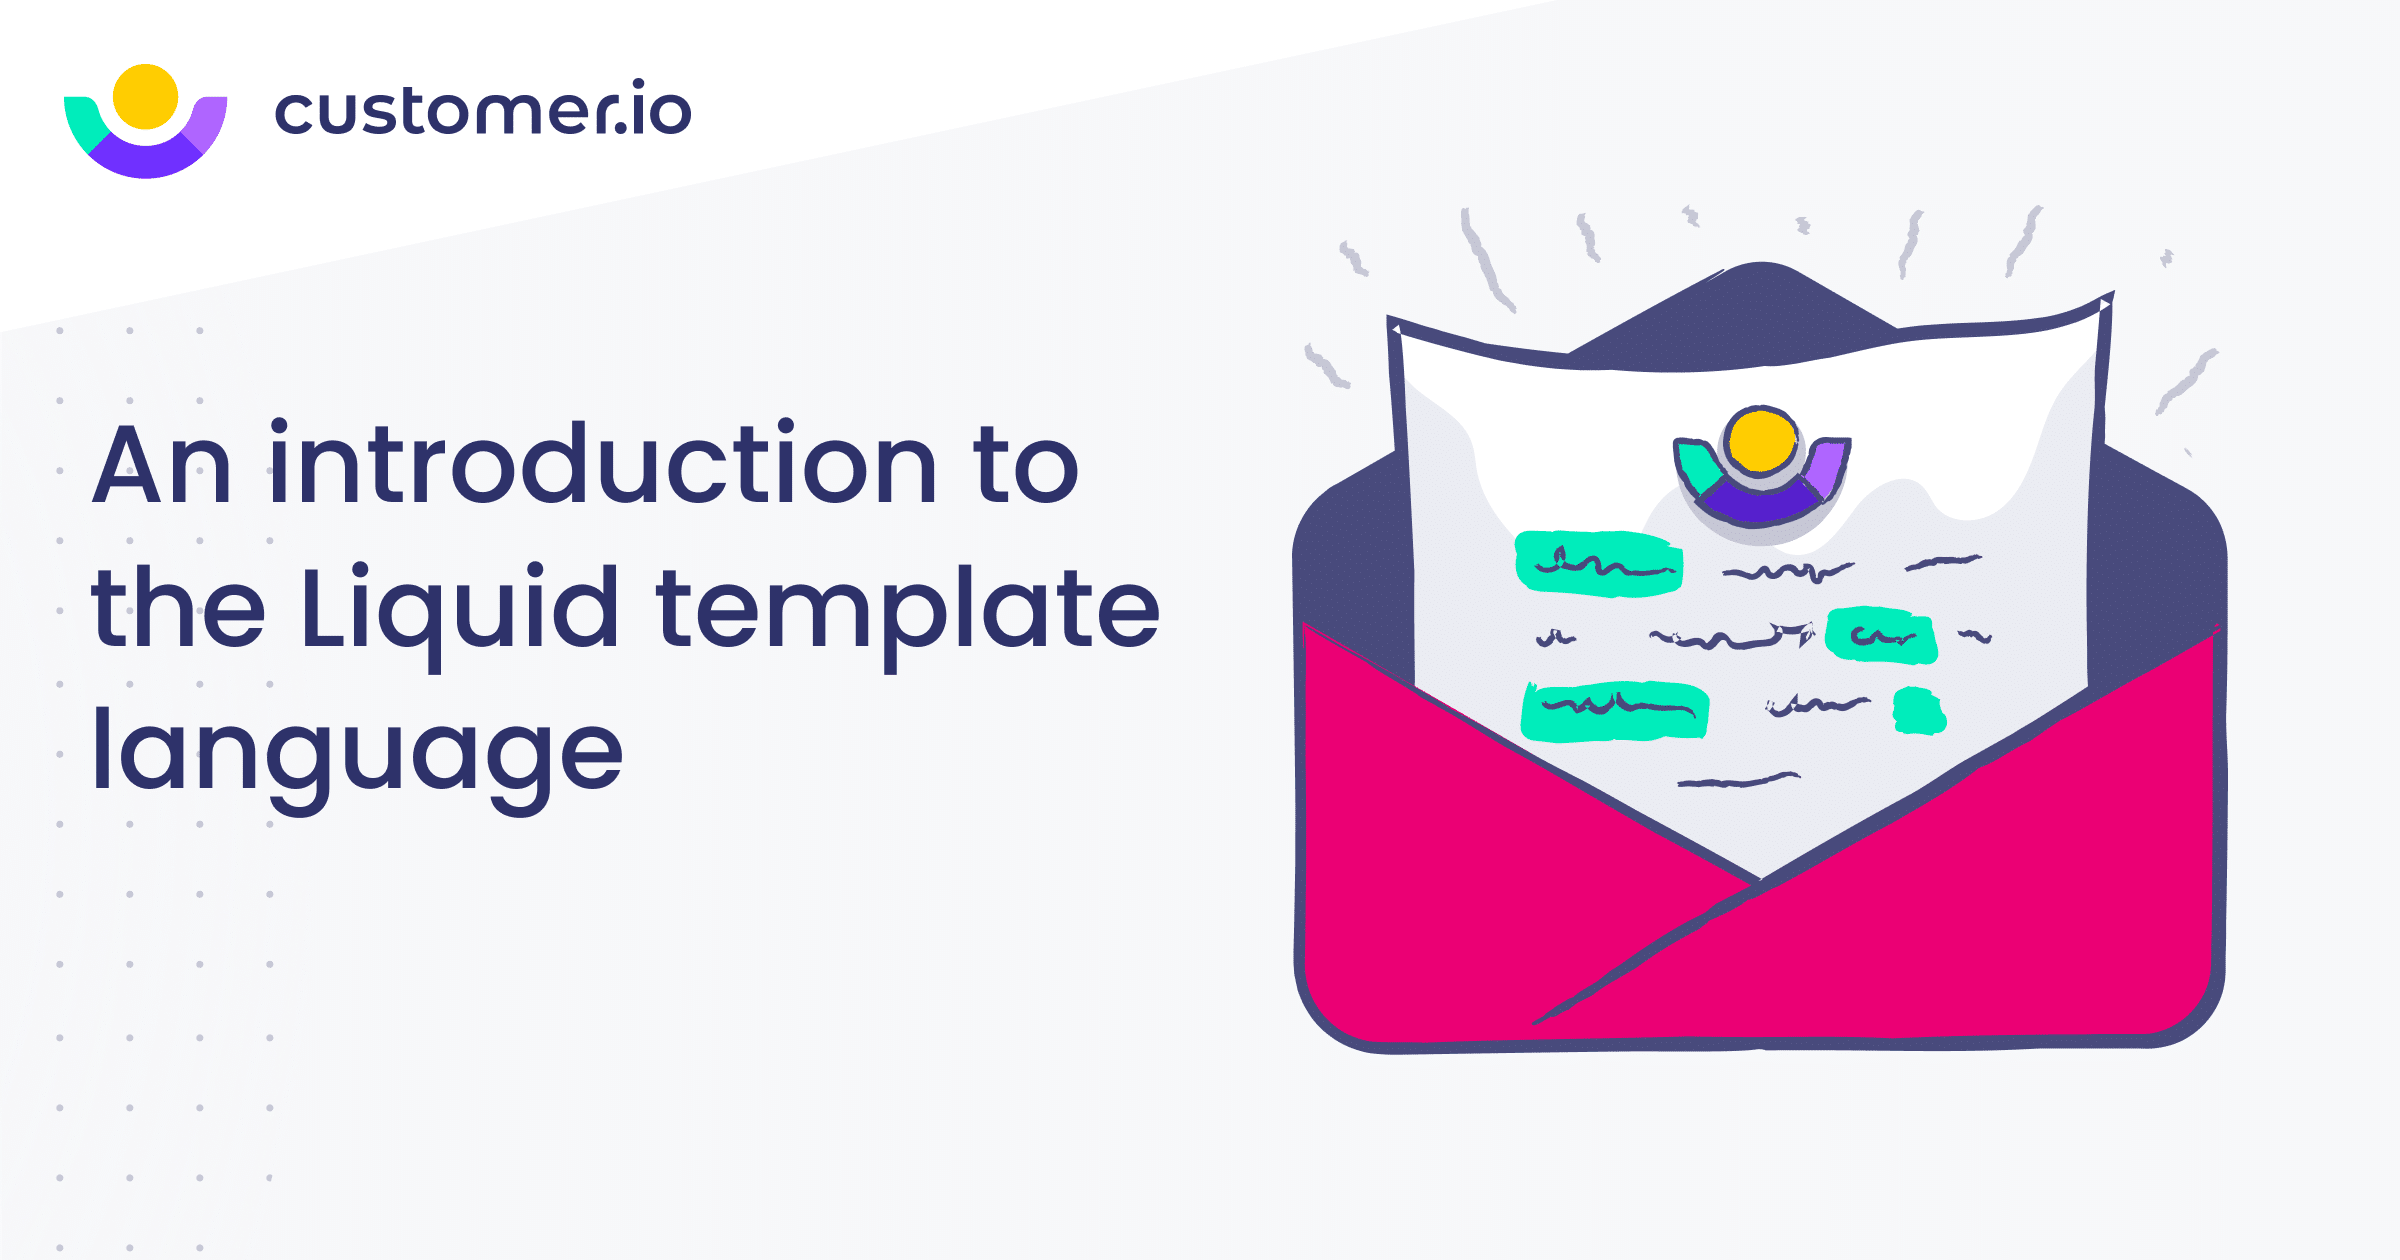 An introduction to the Liquid template language